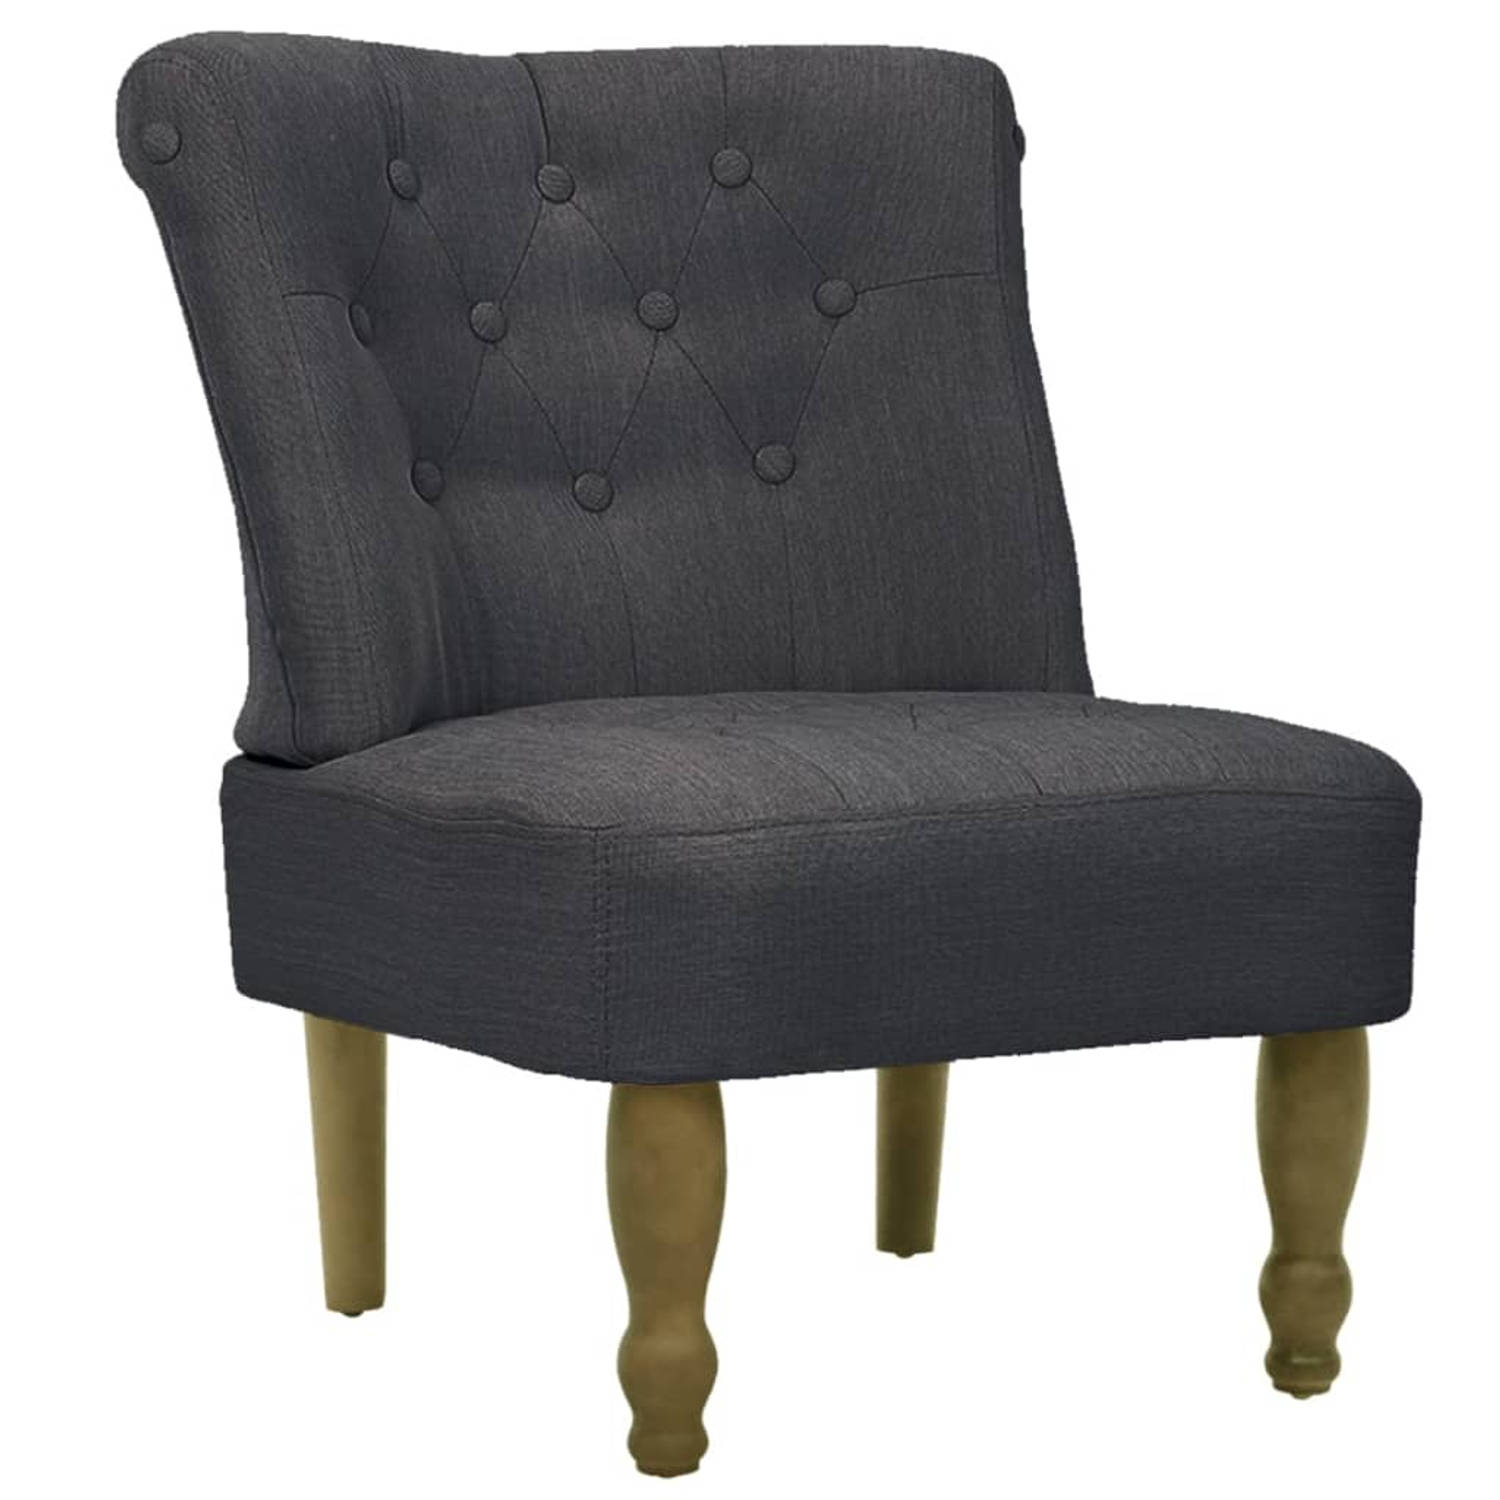 The Living Store Franse stoel stof grijs - Fauteuil